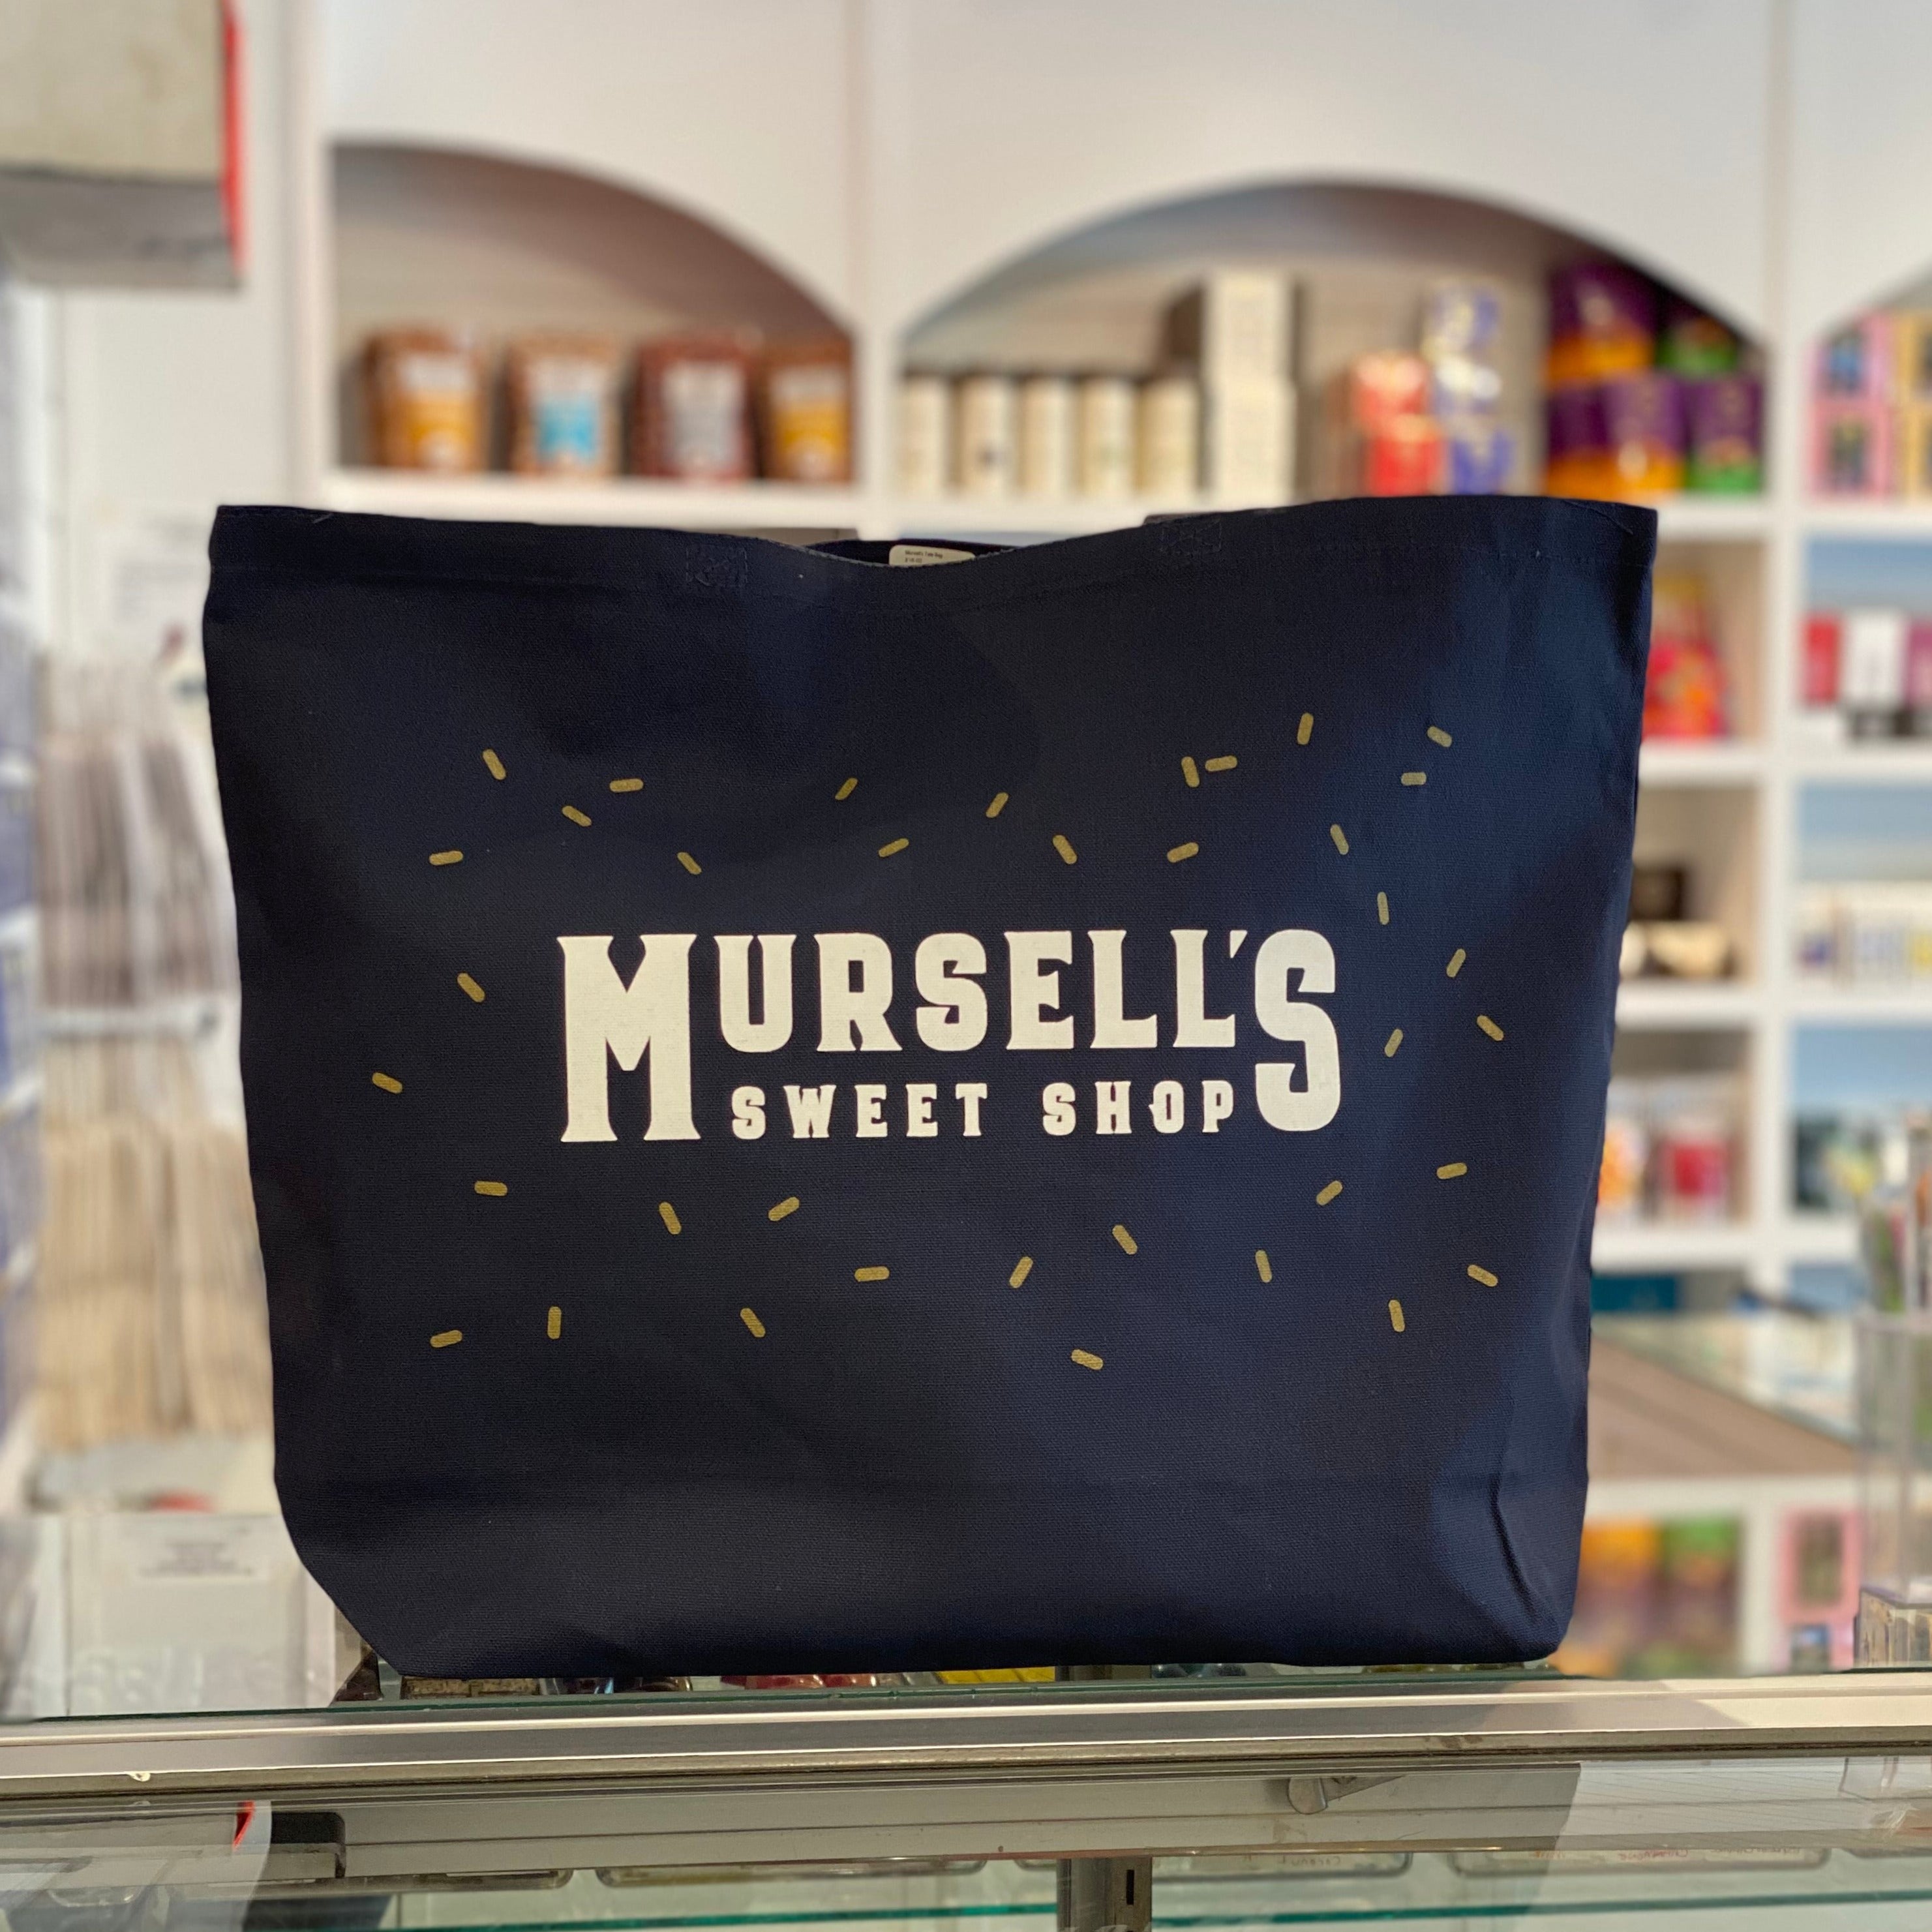 Mursell's Tote Bag